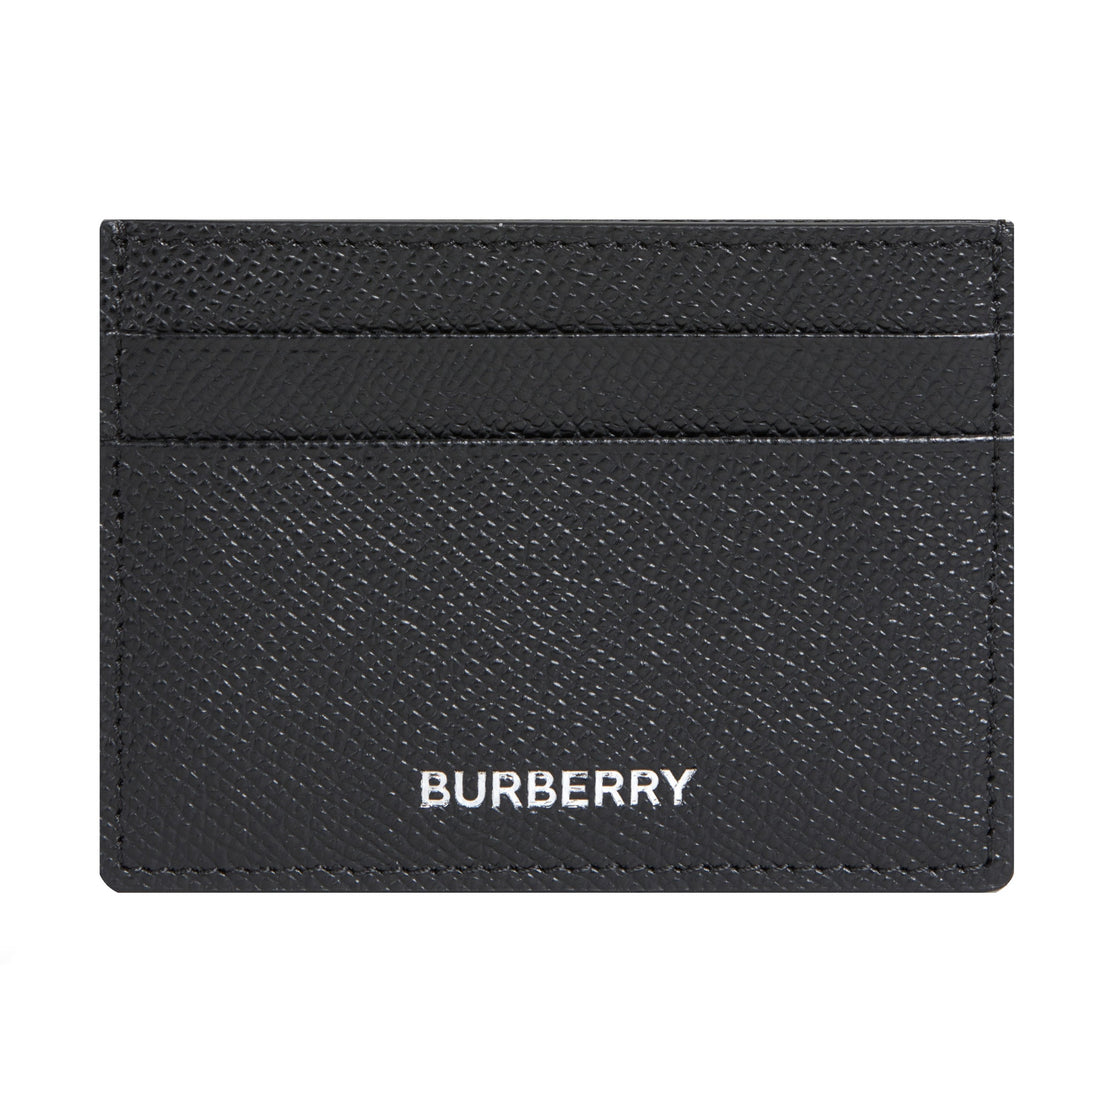 Burberry Grained Leather Card Holder